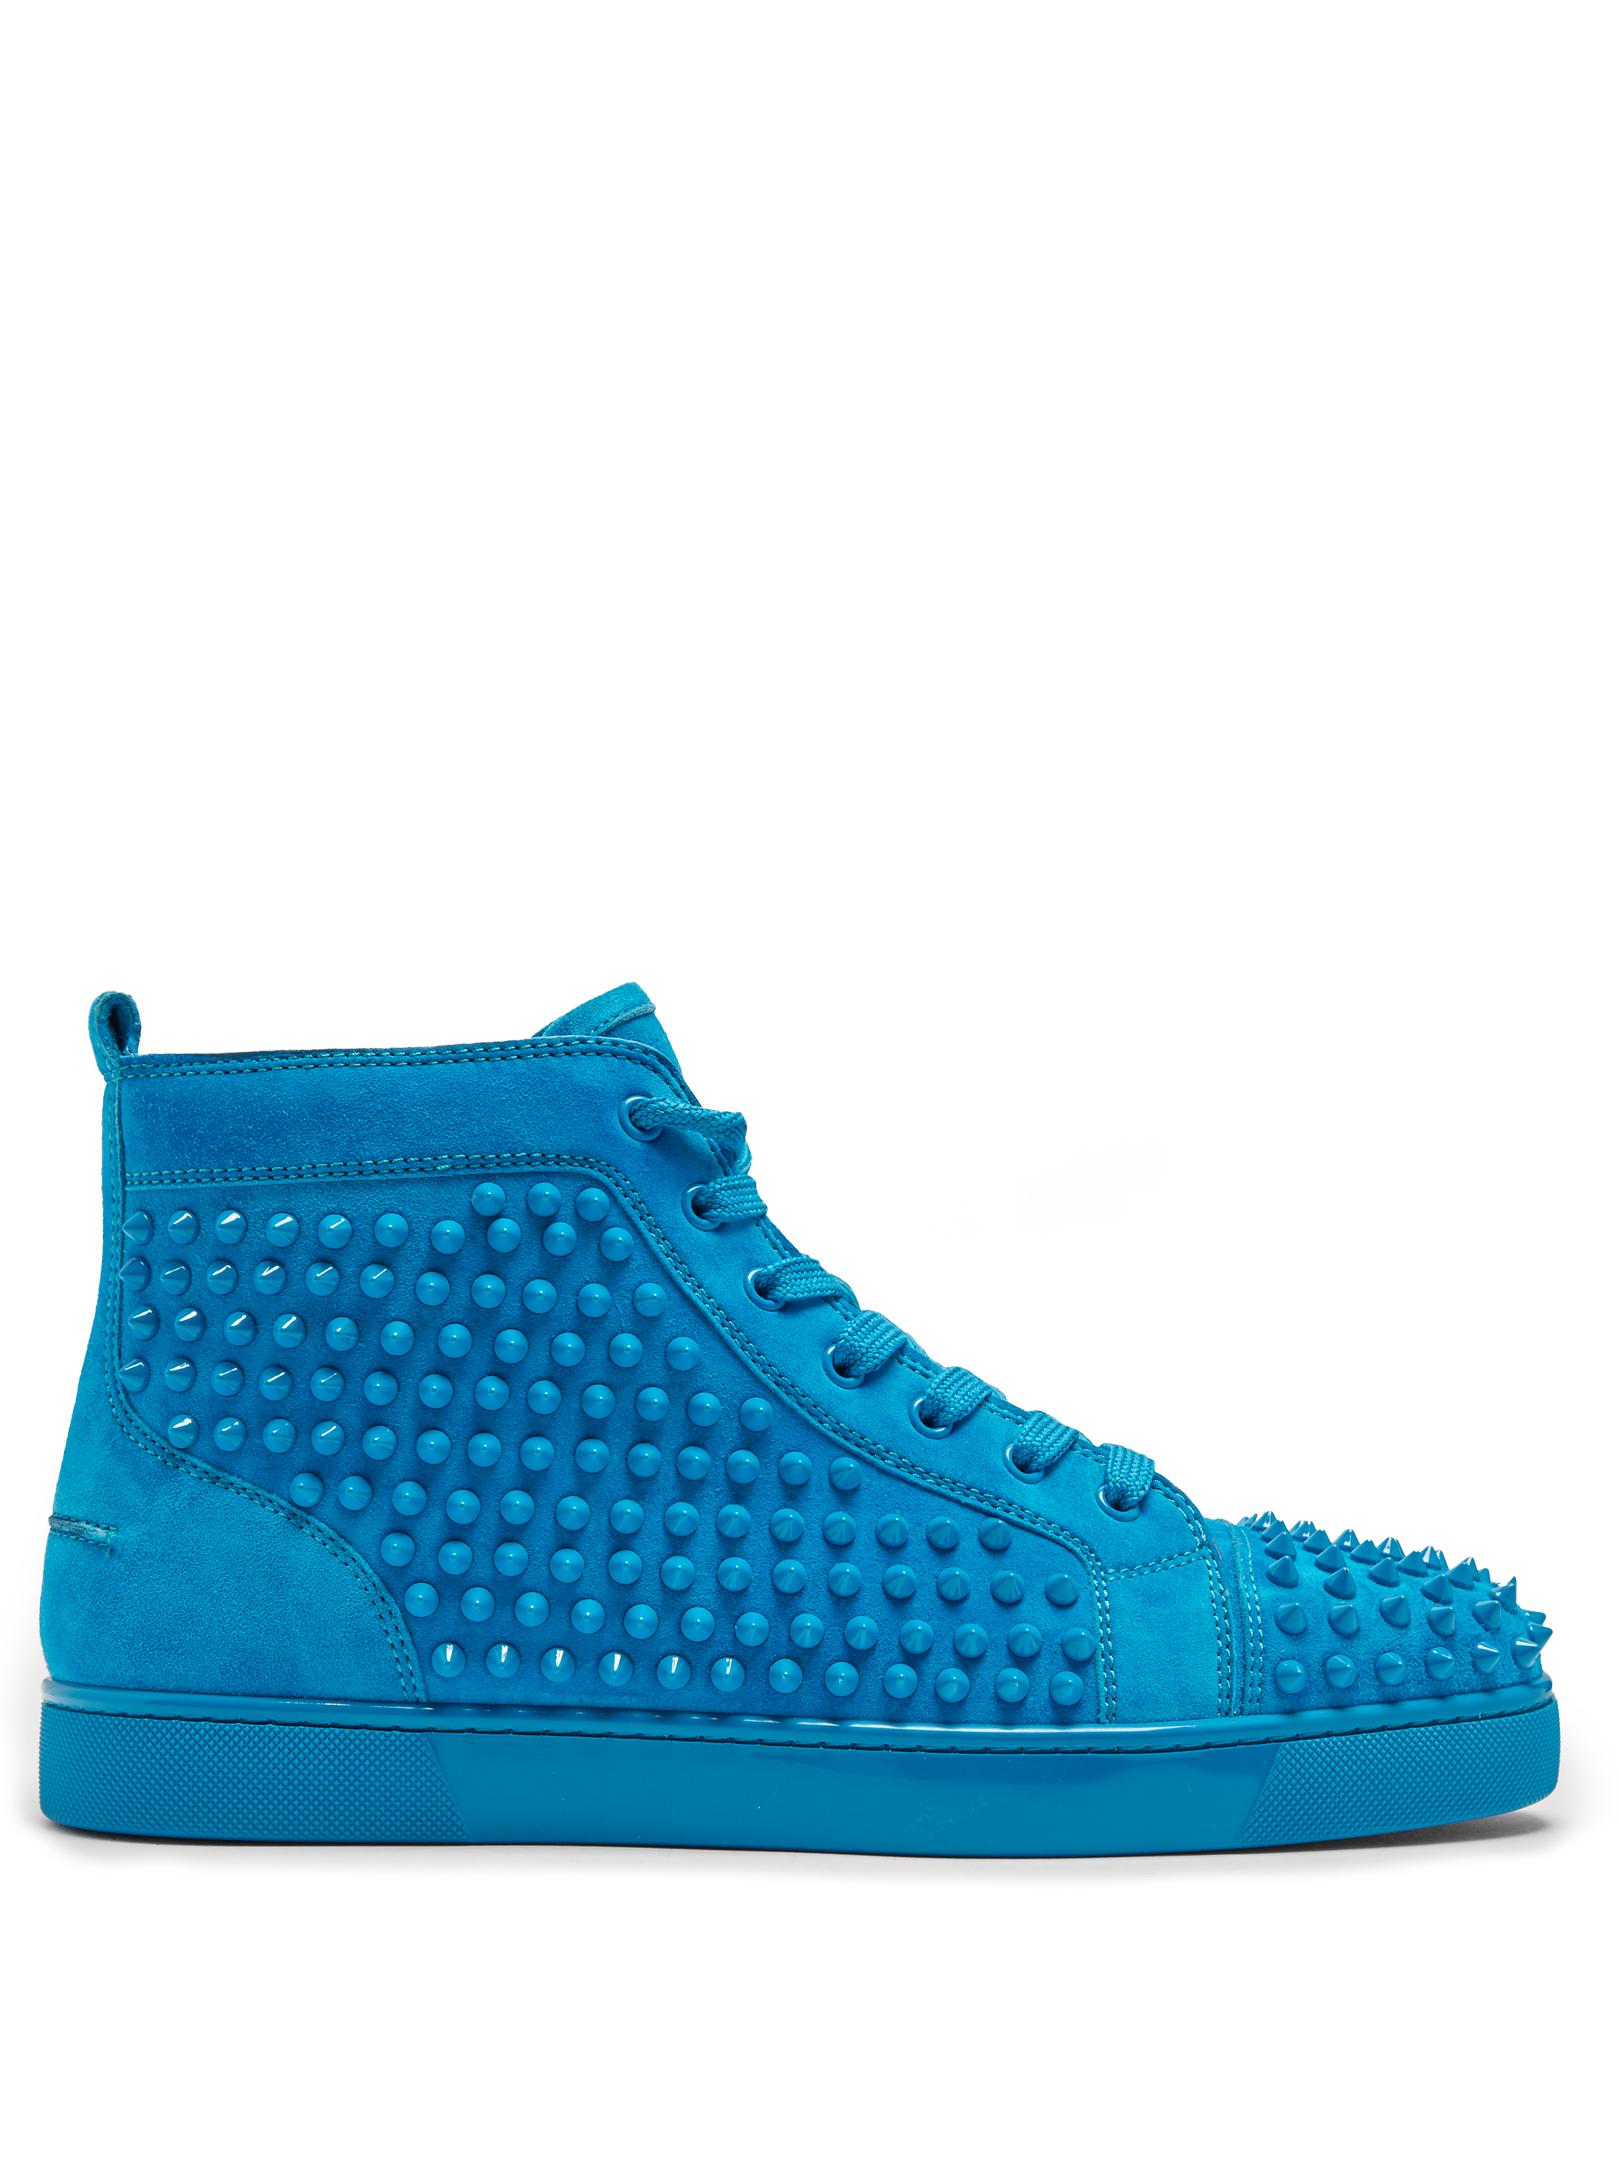 Christian Louboutin Suede Louis Spike-embellished High-top Trainers in Blue for Men - Lyst